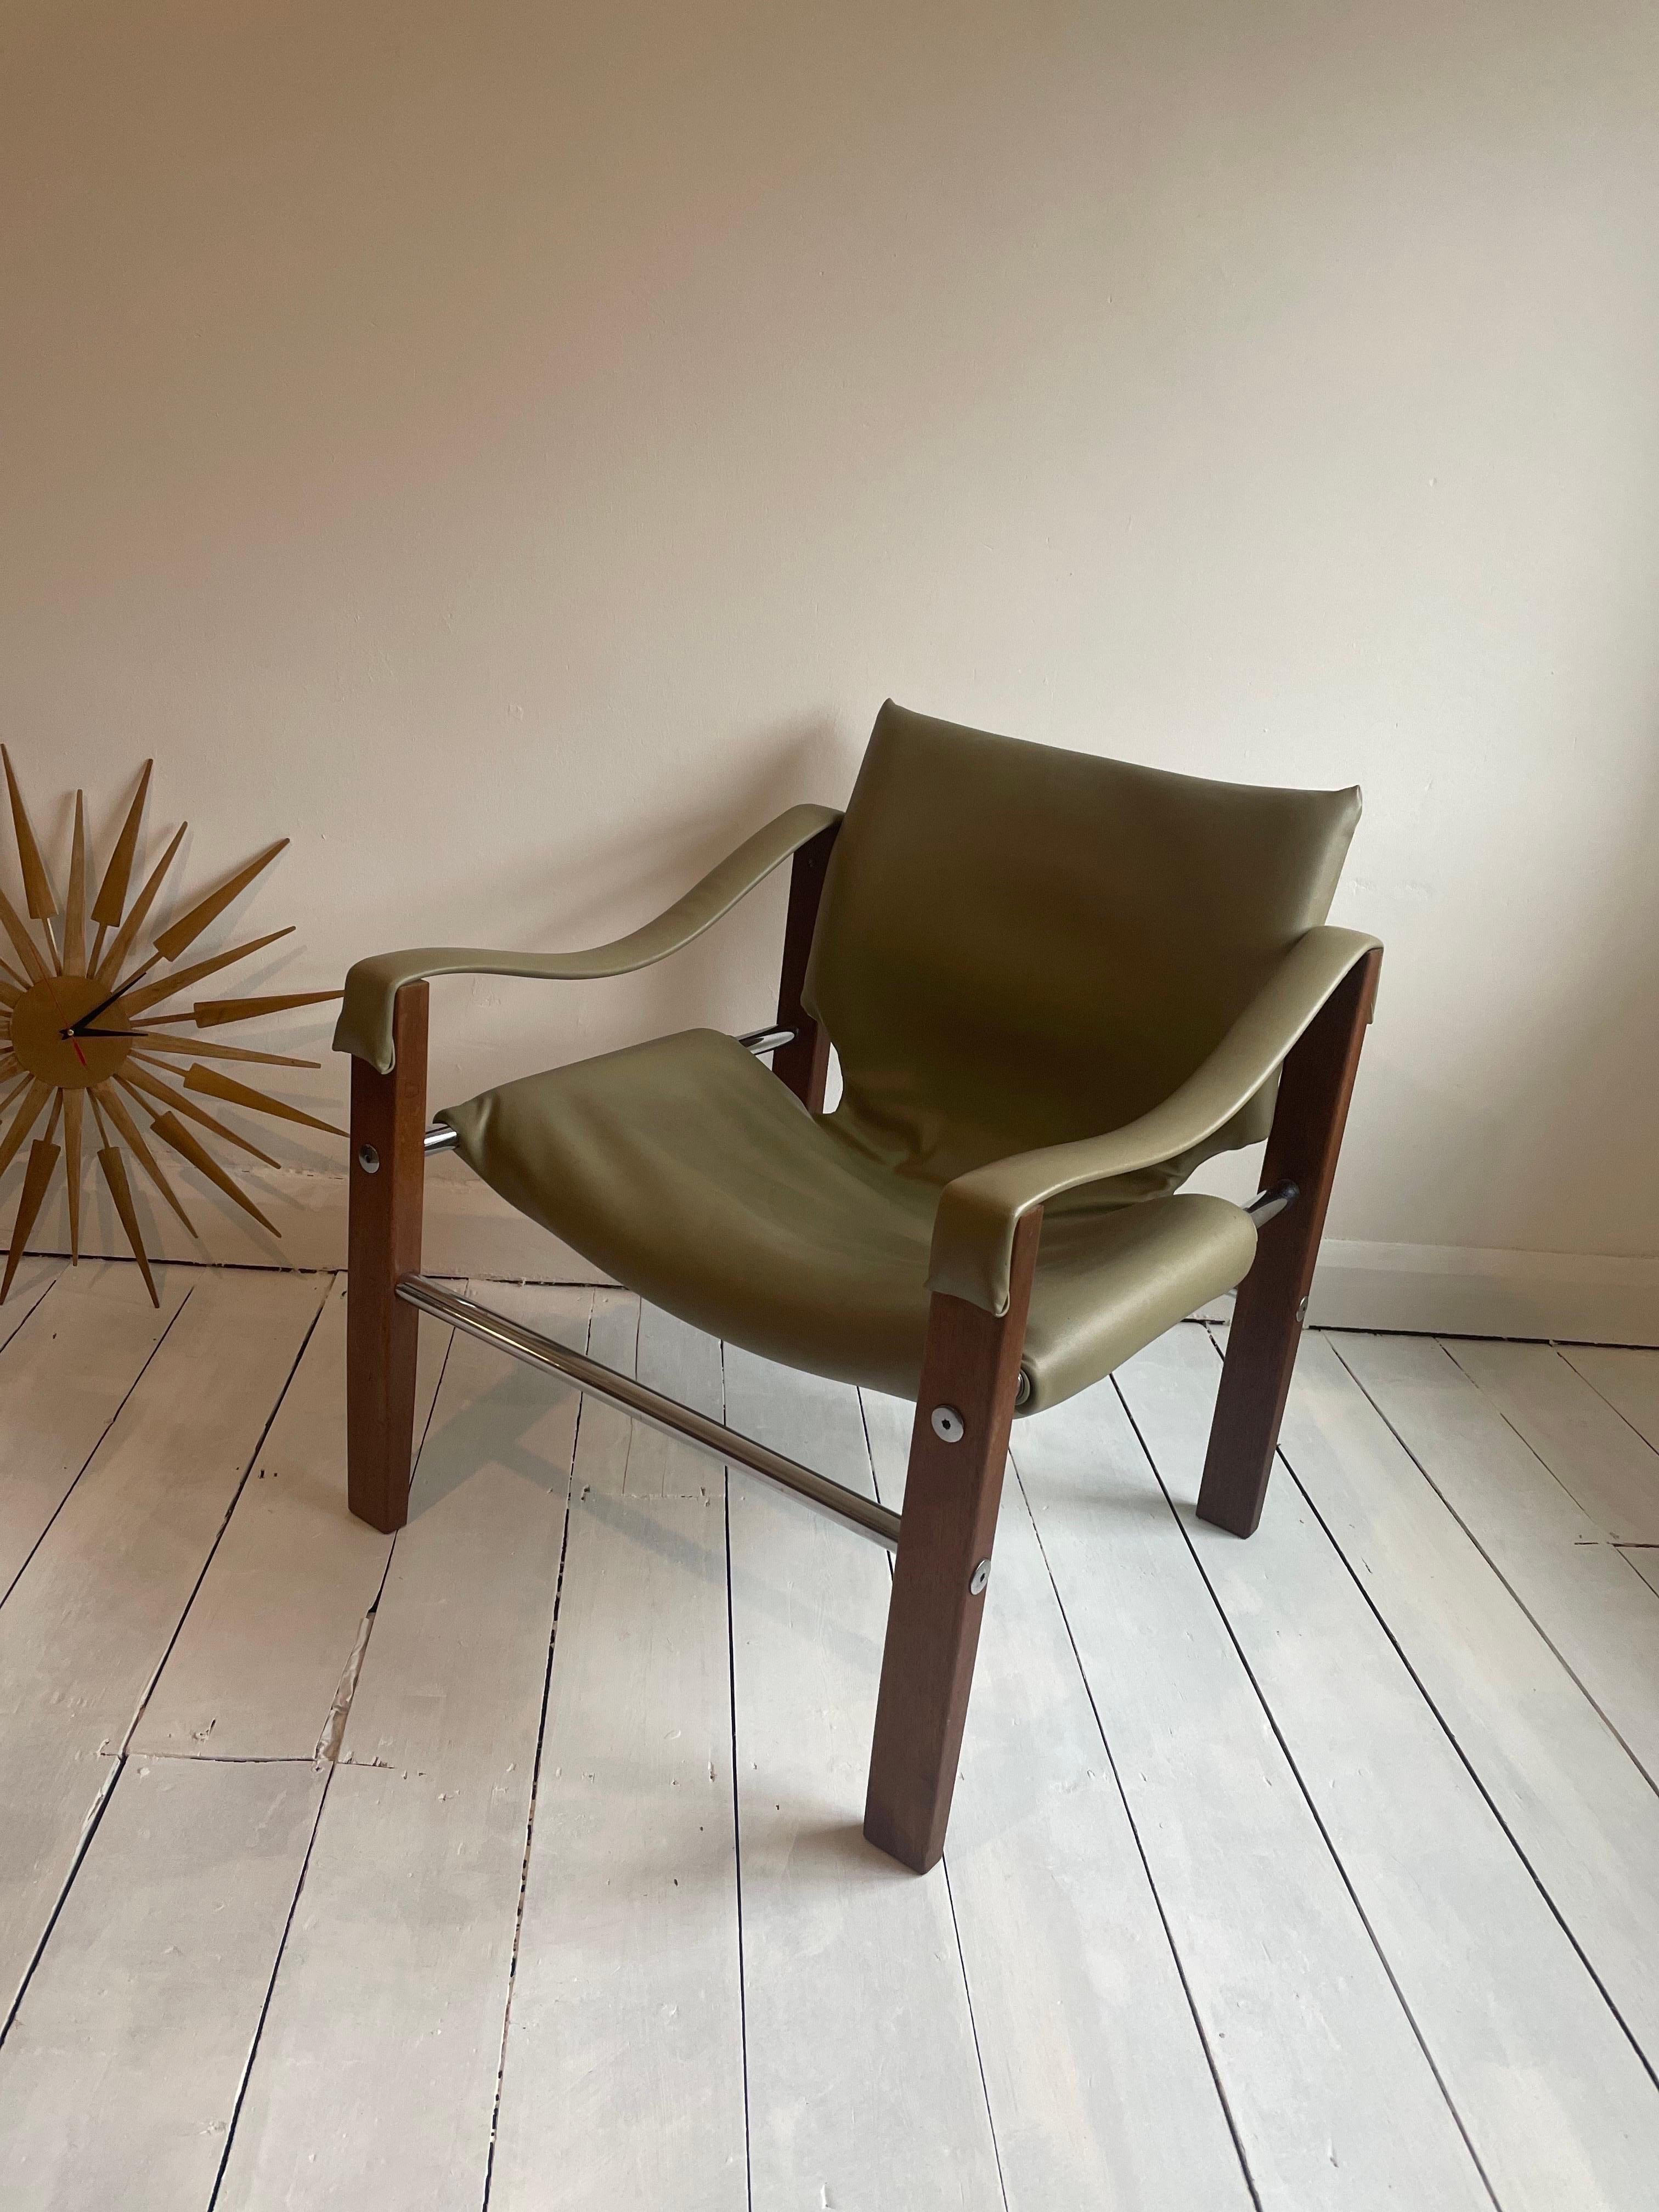 Fantastic vintage Chelsea Safari Chair designed by Maurice Burke for Arkana Furniture wearing its original avocado green faux super rare colour leather or vinyl with a teak frame, tubular chrome metal runners, and steel screw details. Beautiful